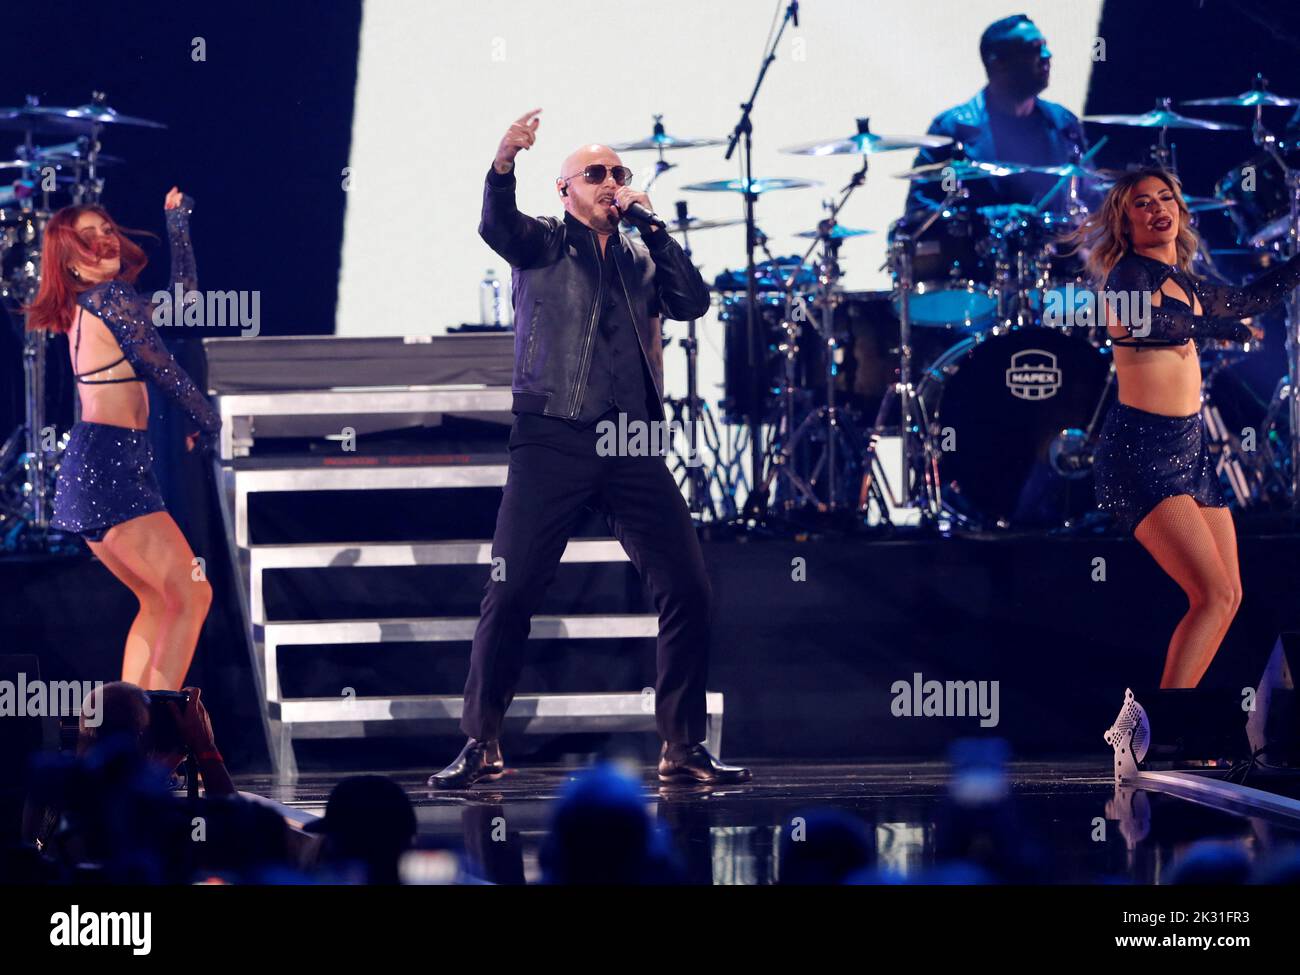 Pitbull performs during the first day of the iHeartRadio Music Festival 2022 at T-Mobile Arena in Las Vegas, Nevada, U.S. September 23, 2022. REUTERS/Steve Marcus Stock Photo